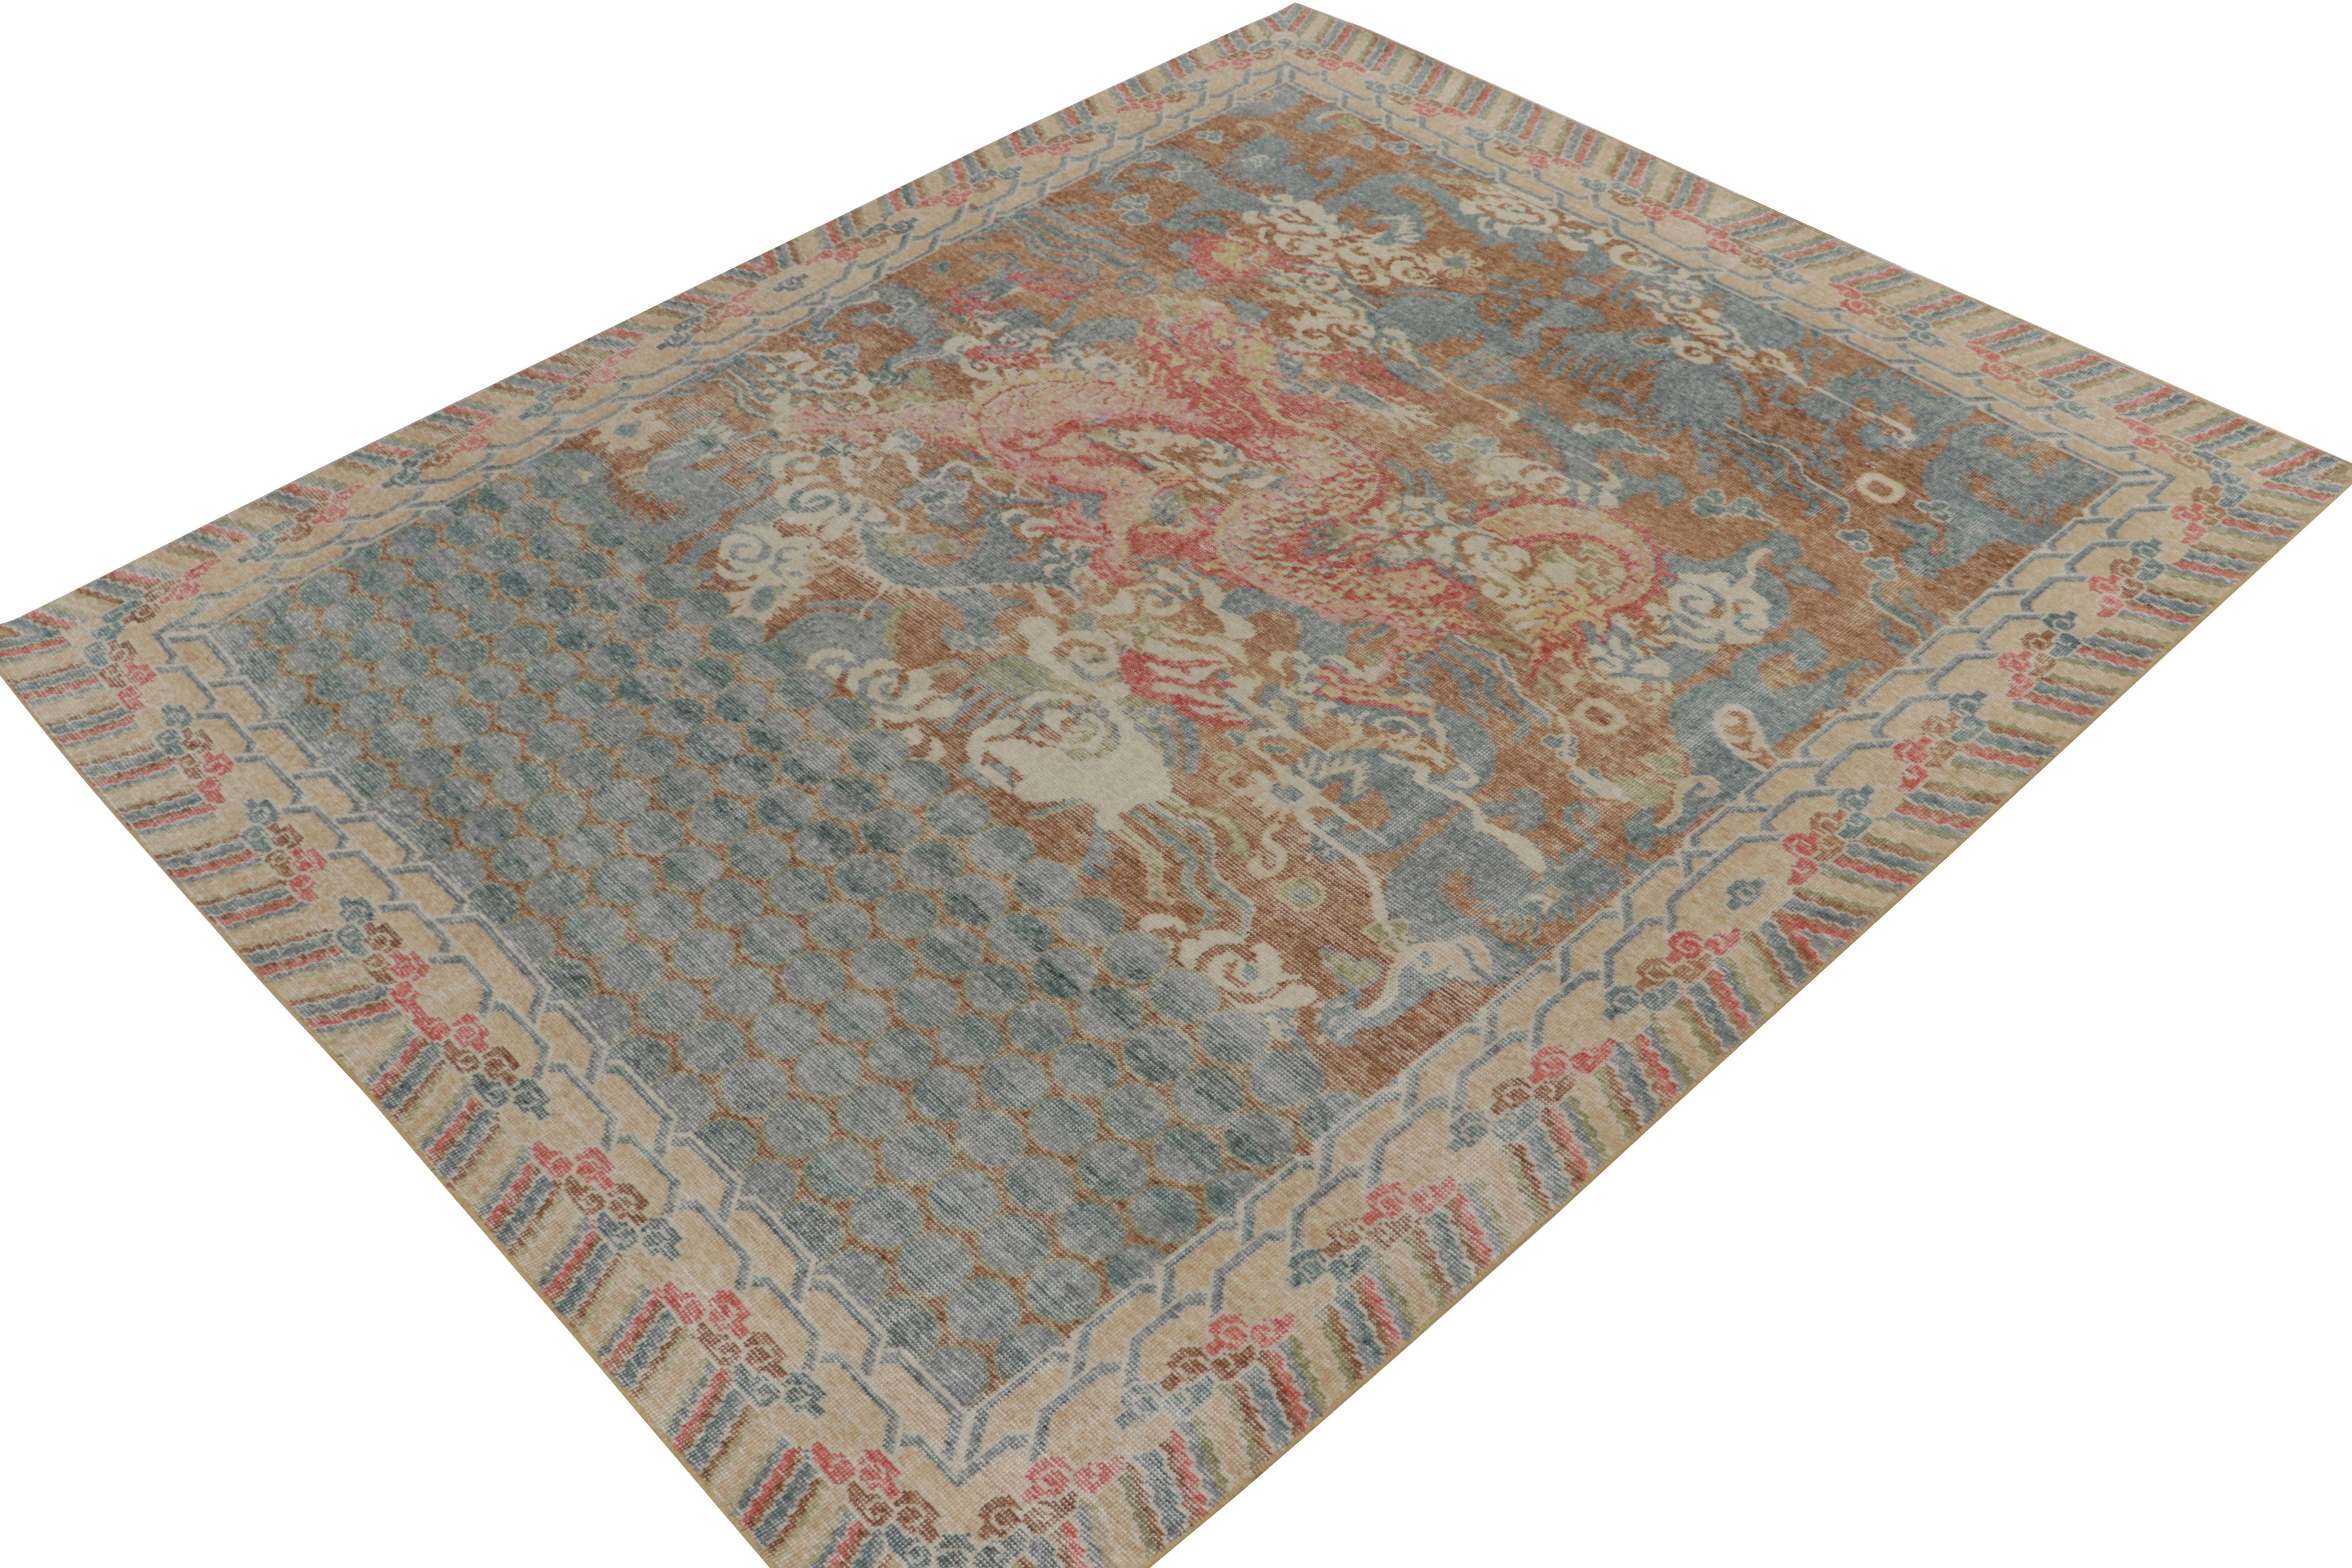 Indian Rug & Kilim's Distressed Style Dragon Rug in Brown, Blue, Red Pictorials For Sale